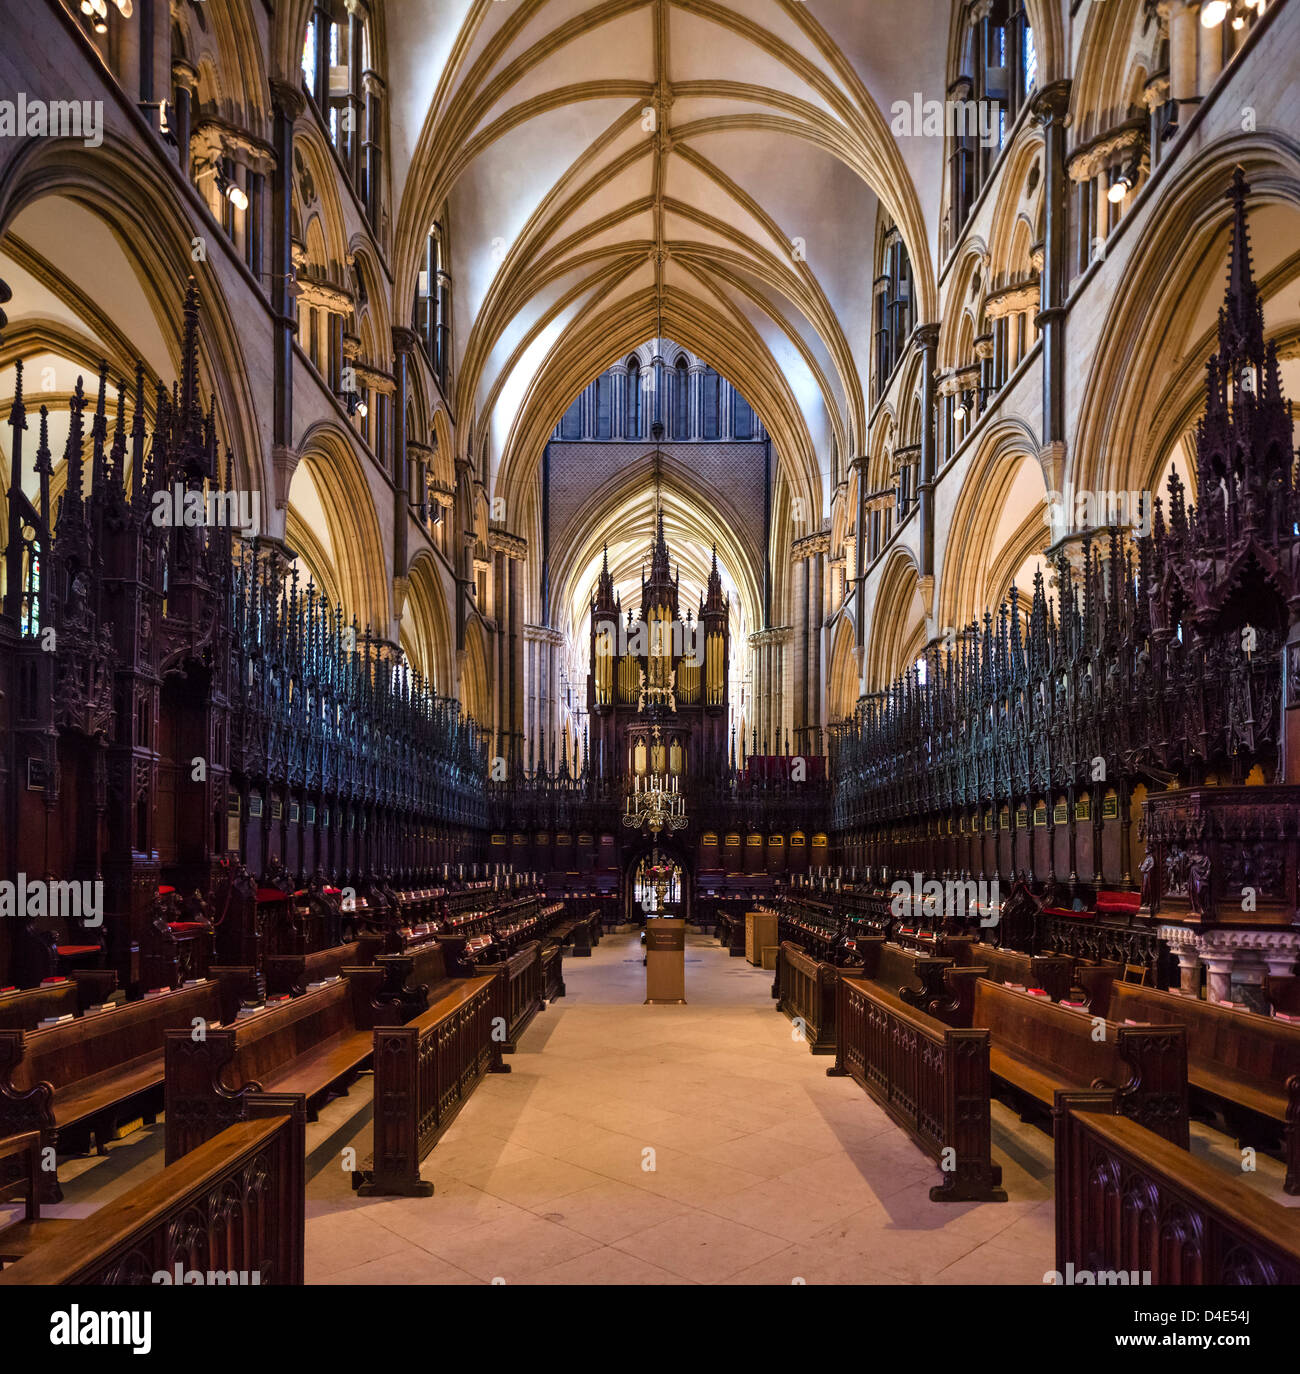 St Hughs Chor in Kathedrale von Lincoln, Lincoln, Lincolnshire, East Midlands, UK Stockfoto